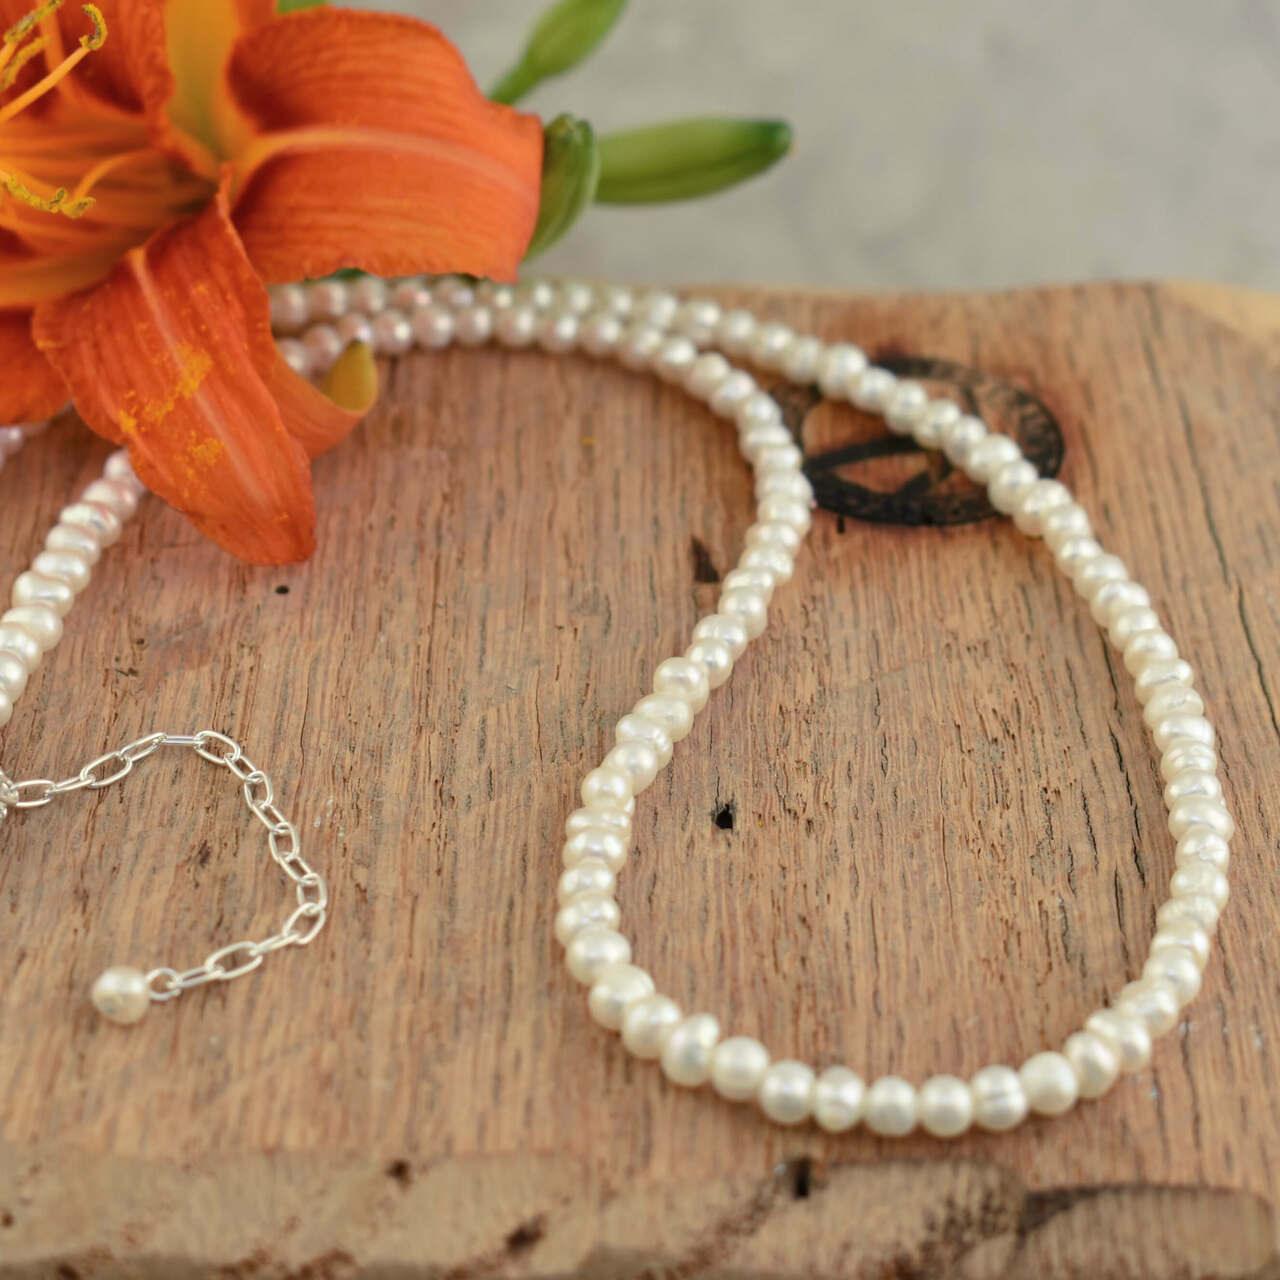 Freshwater pearl necklace with .925 sterling silver